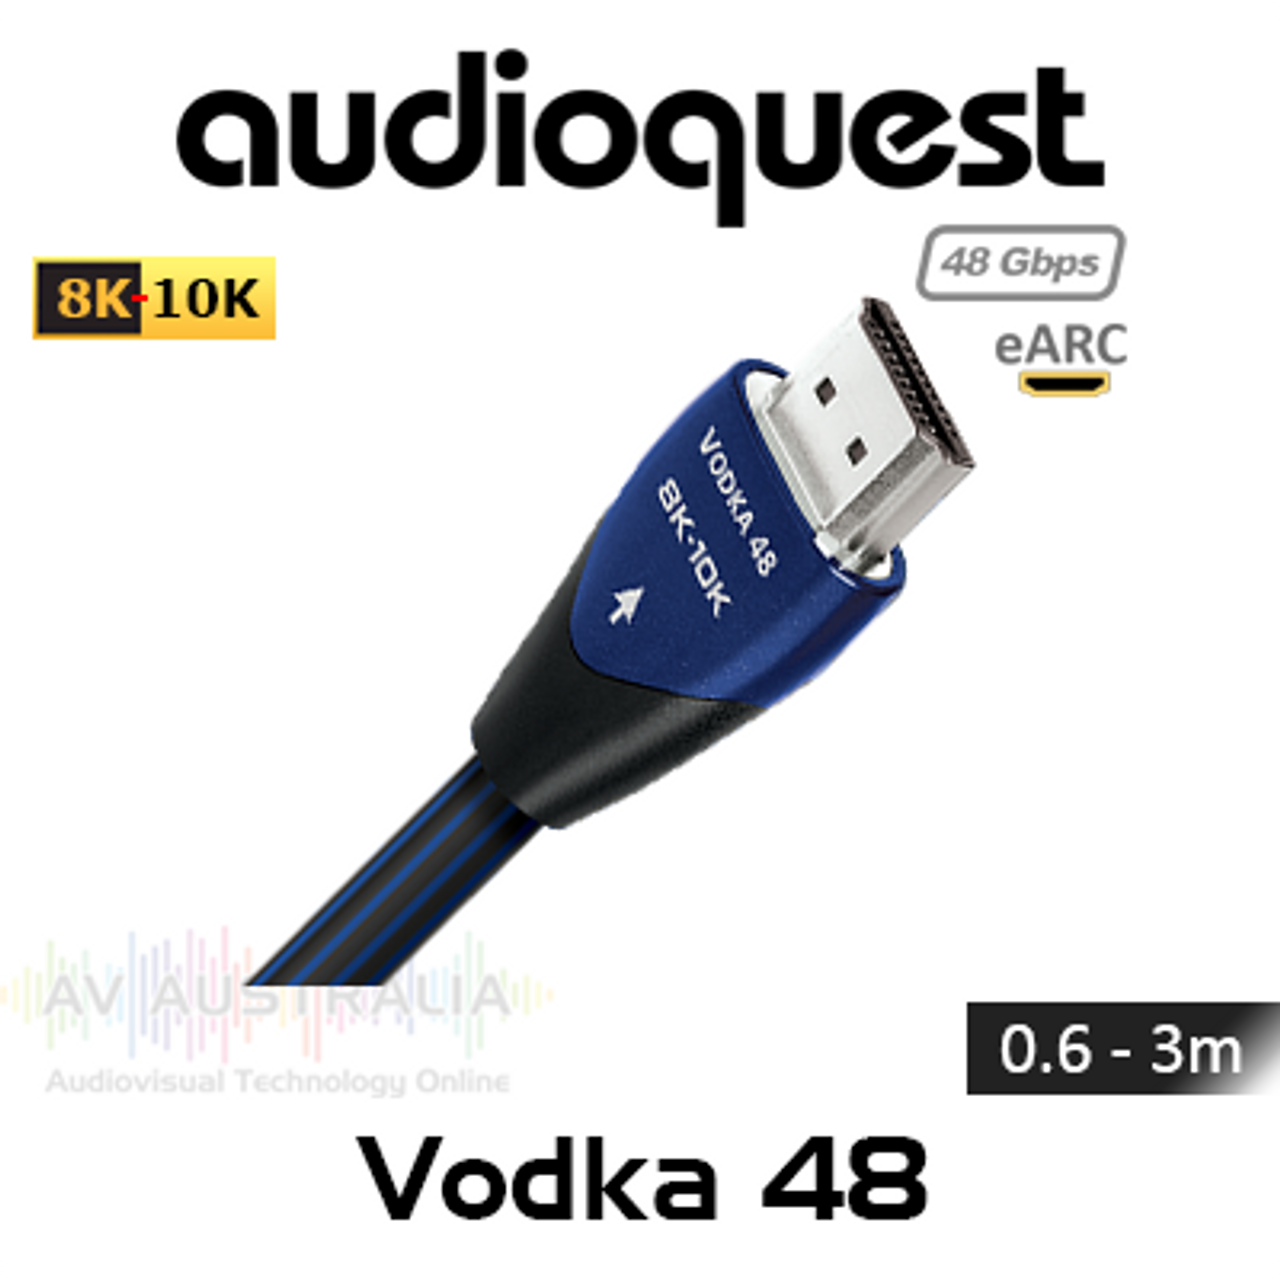 AudioQuest Vodka 8K/10K 48Gbps HDMI Cable